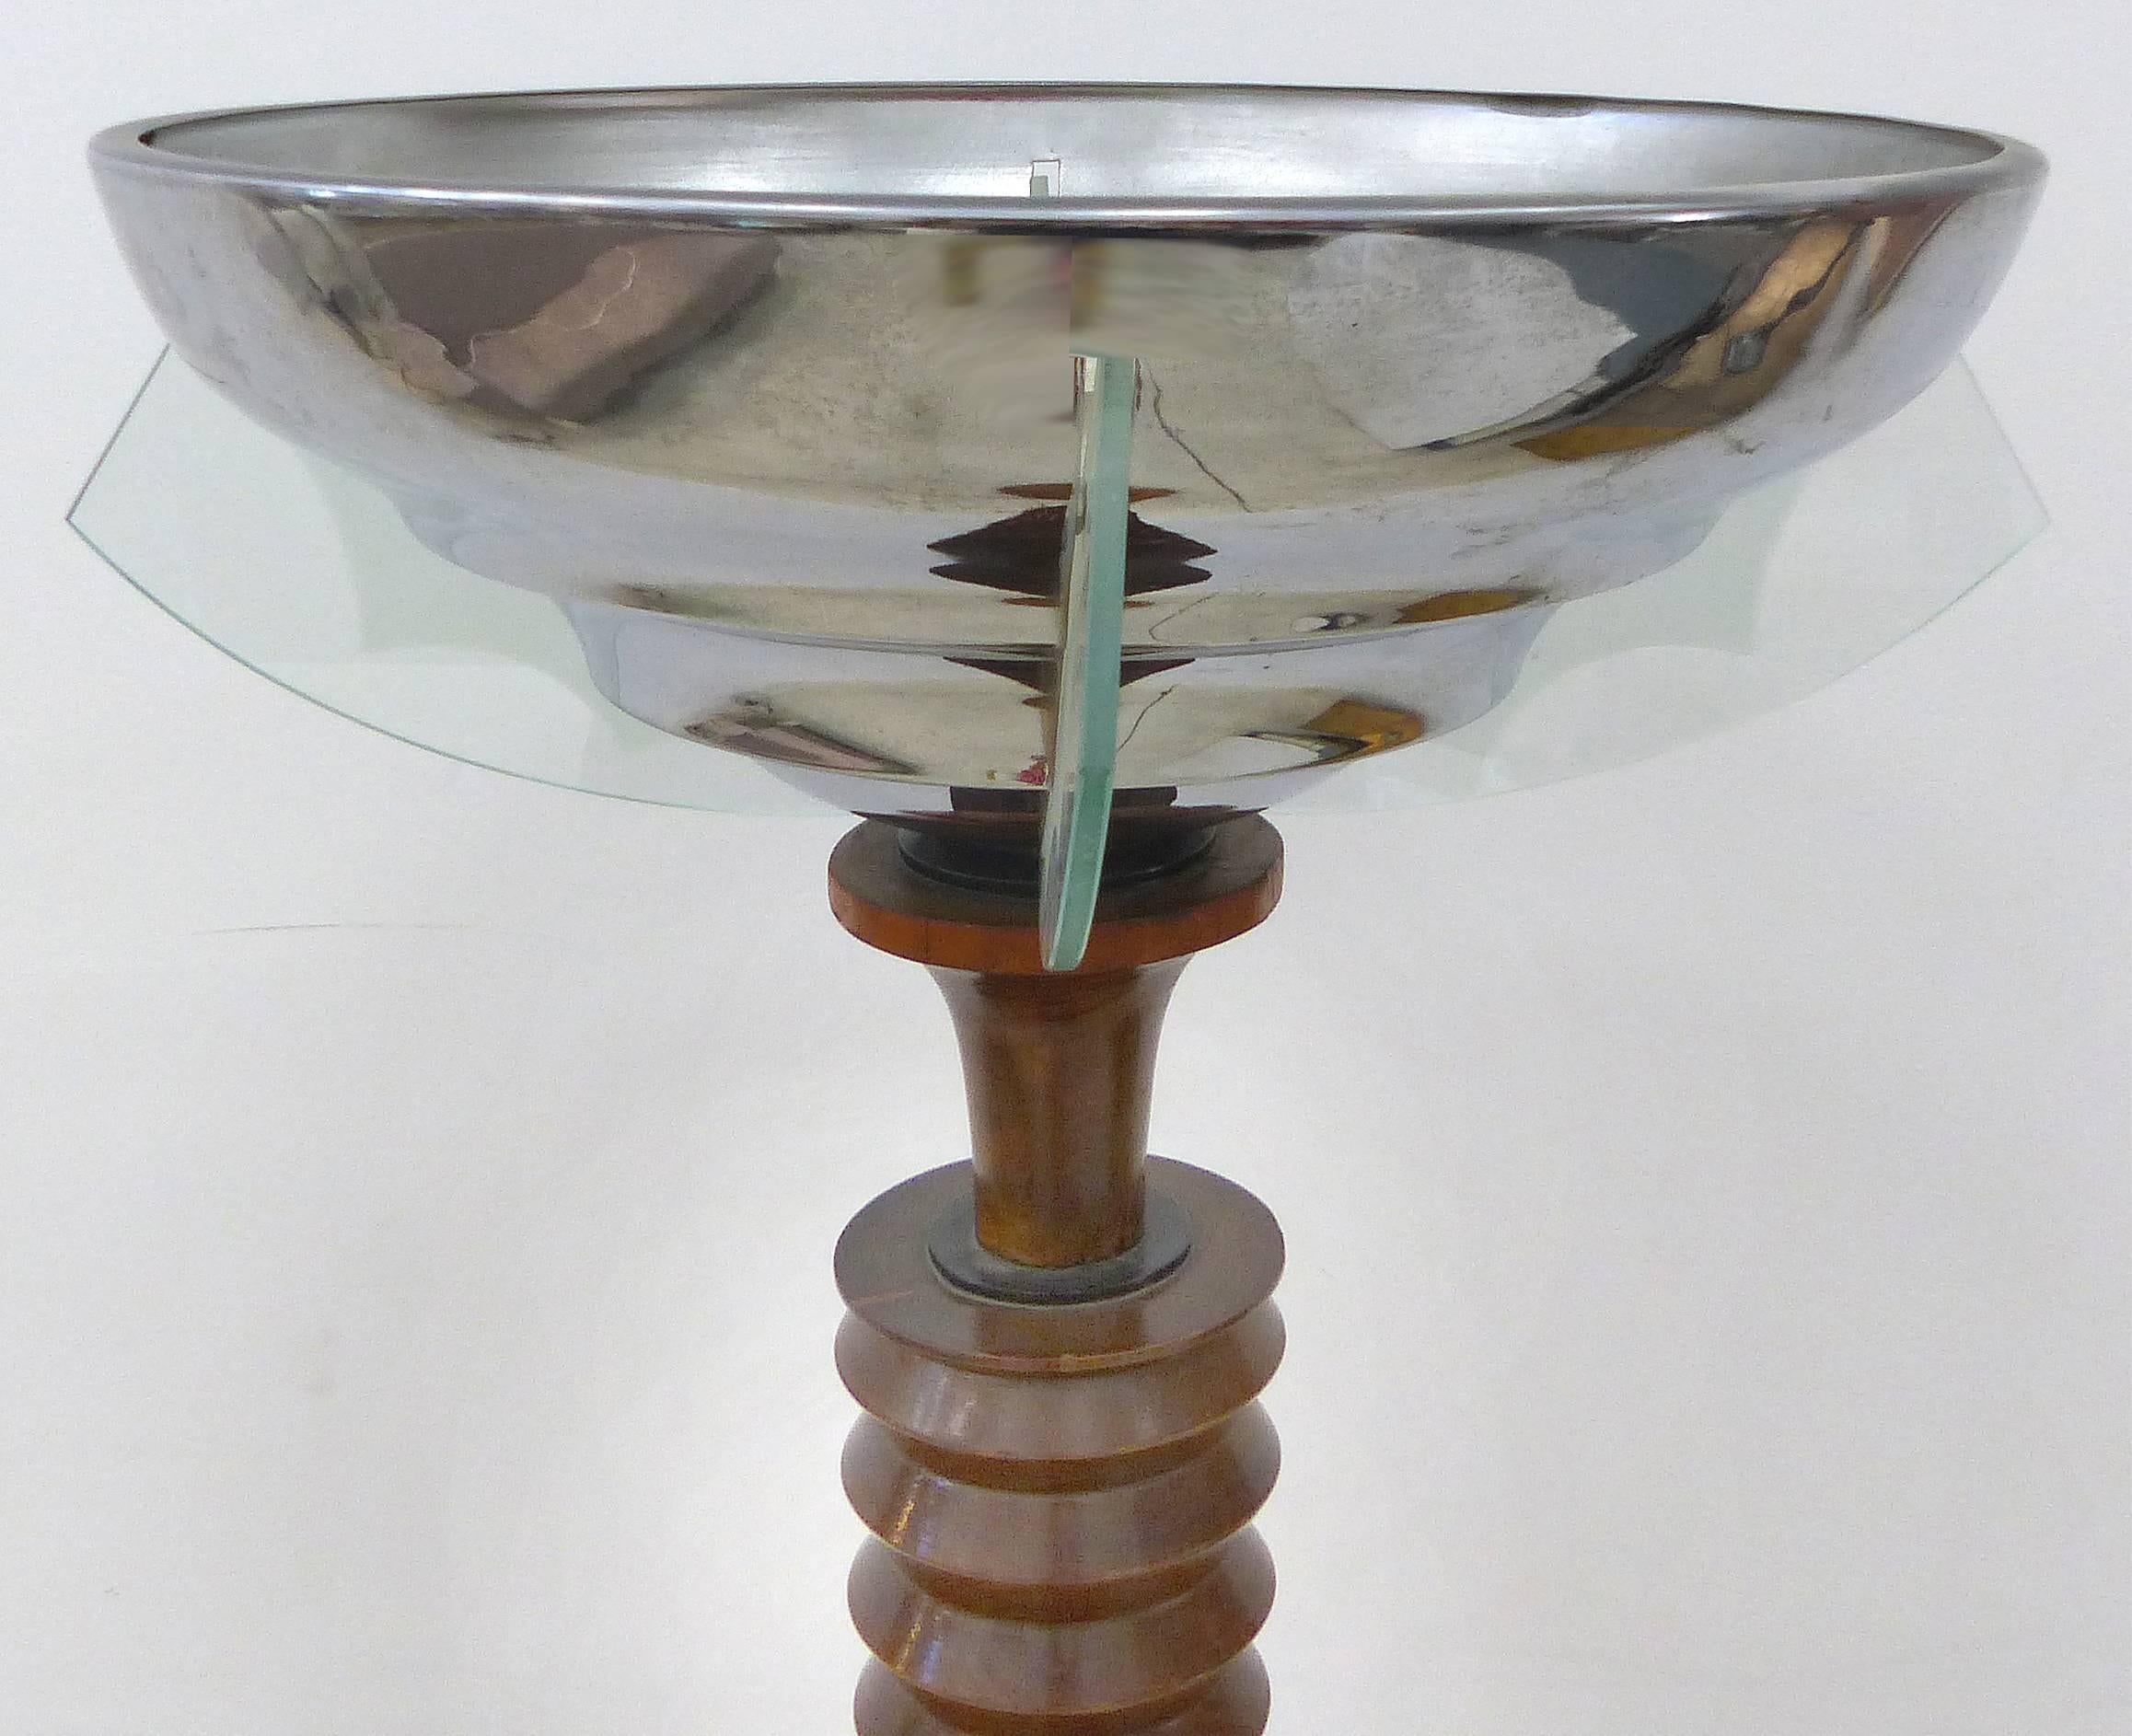 French Art Deco Atelier Petitot Torchiere with Chrome and Glass Fins

This Classic French Art Deco torchiere by Atelier Petitot is from the 1930s. The wood shaft swells as it rises to meet ten graduated rings. The illuminated glass fins are frosted